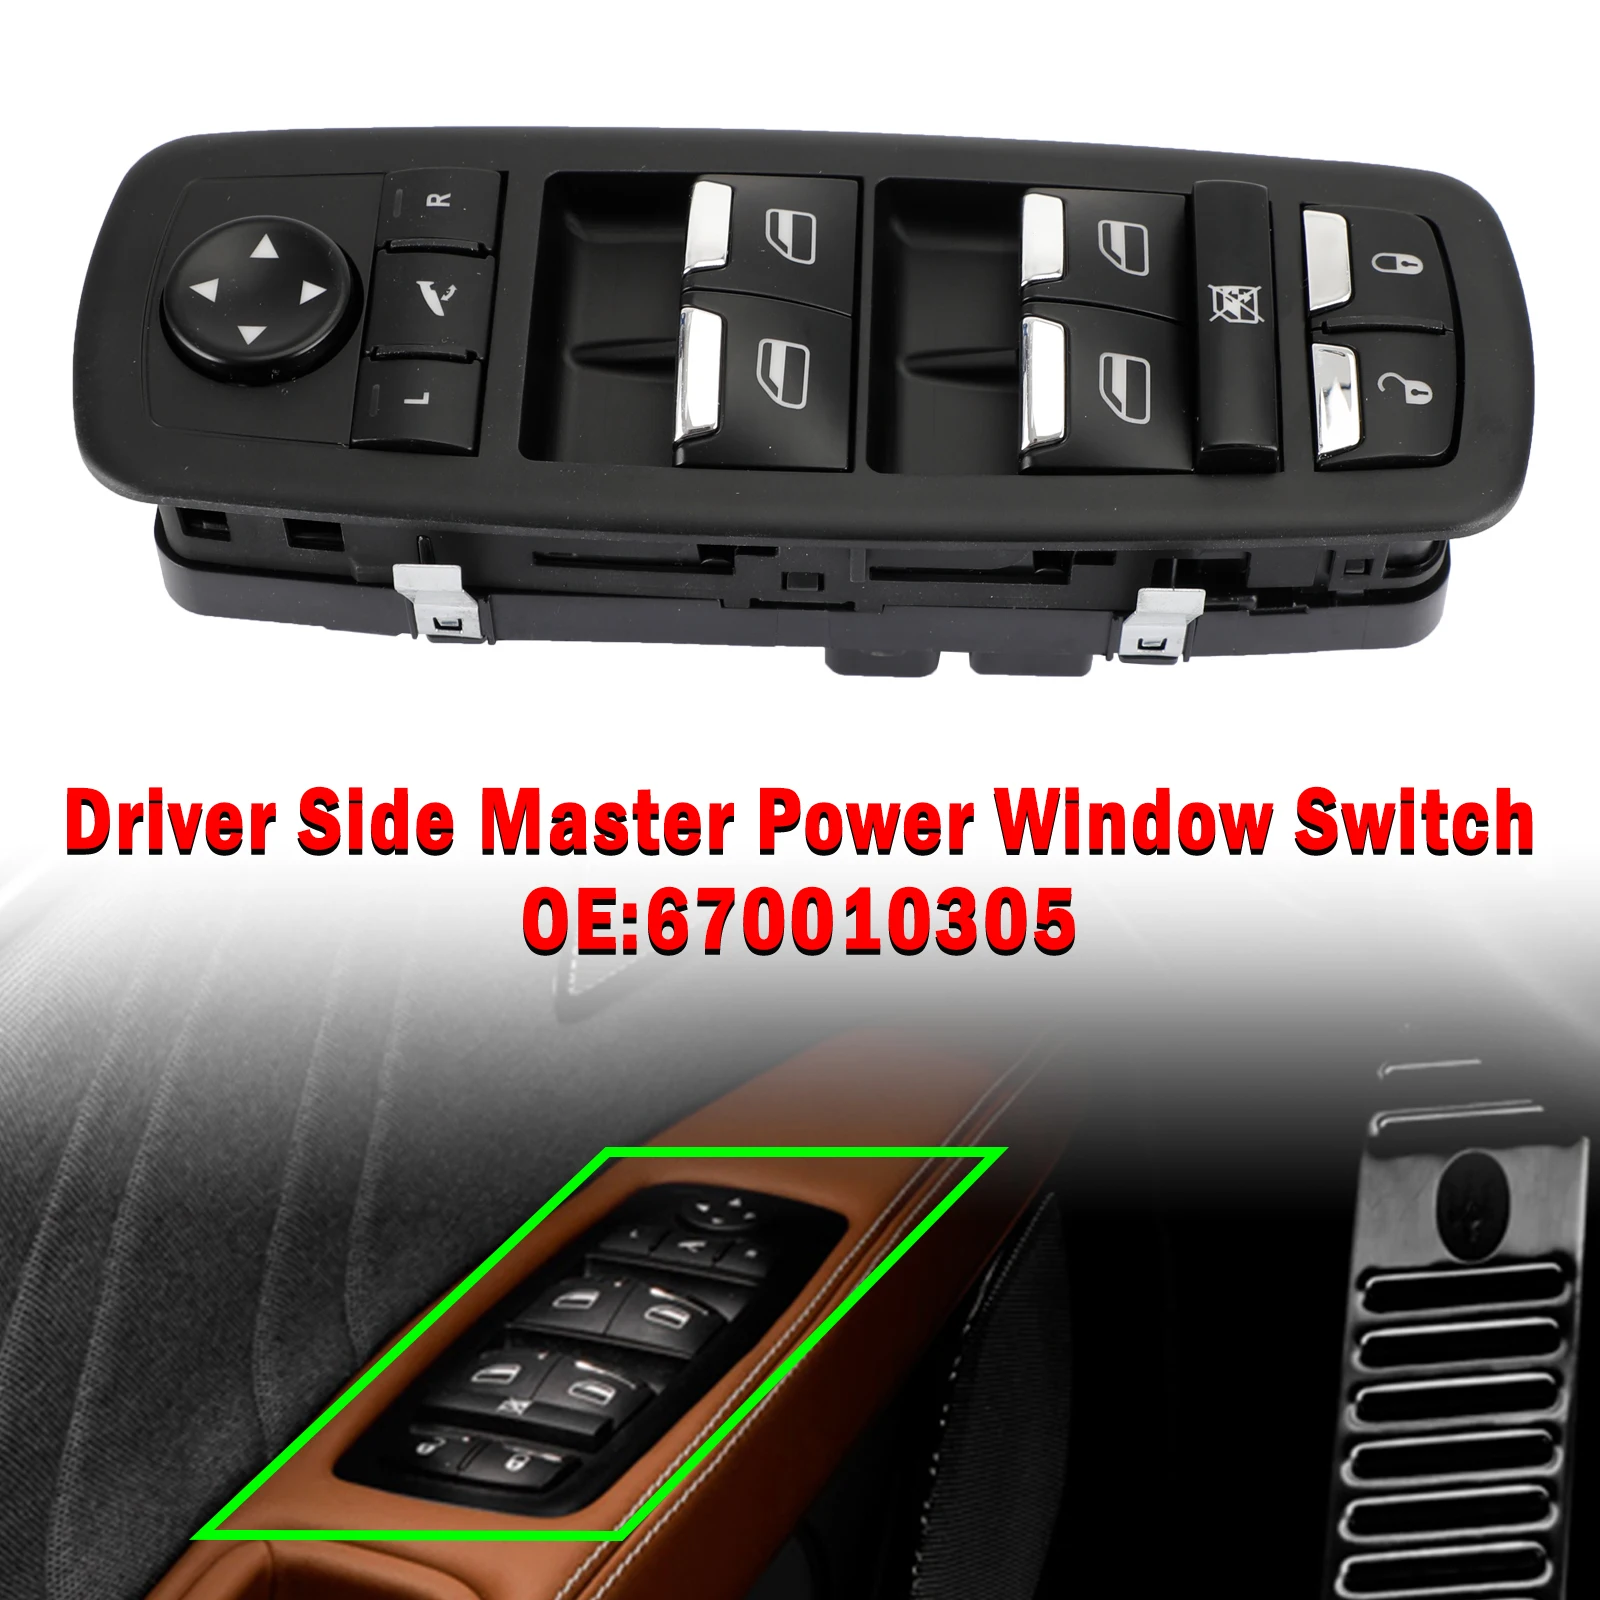 

Areyourshop Driver Side Master Power Window Switch 670010305 for Maserati Ghibli 2014-2018 Car Accessories Auto Parts